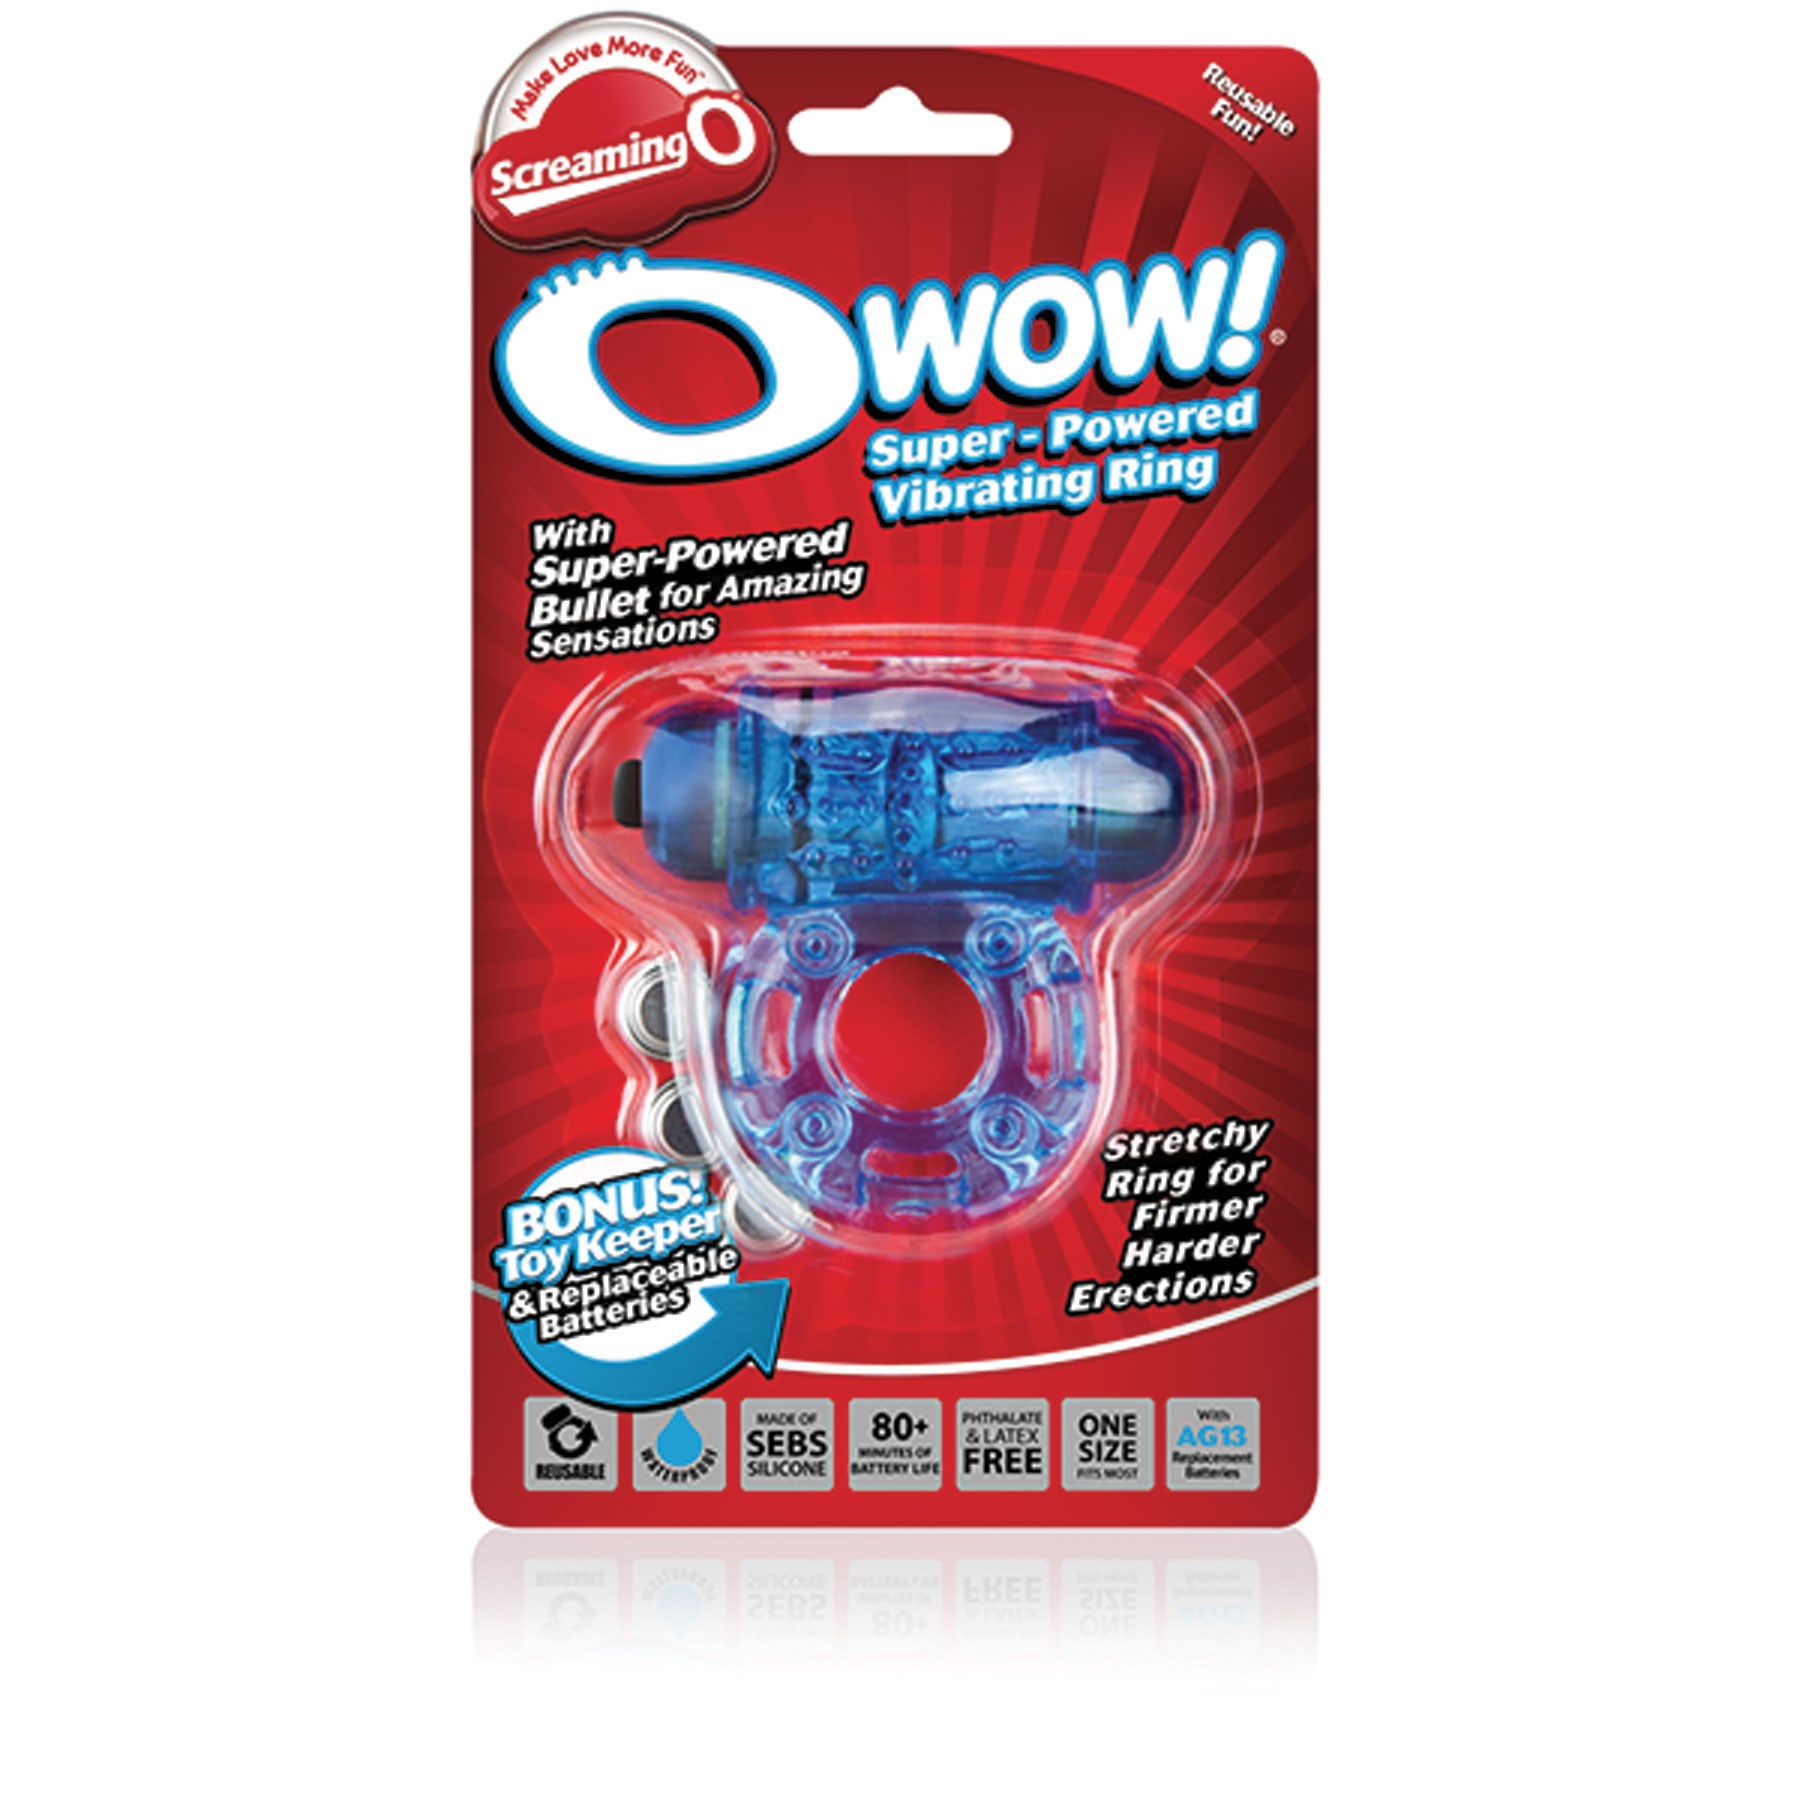 O Wow Vibrating Ring blue packaging